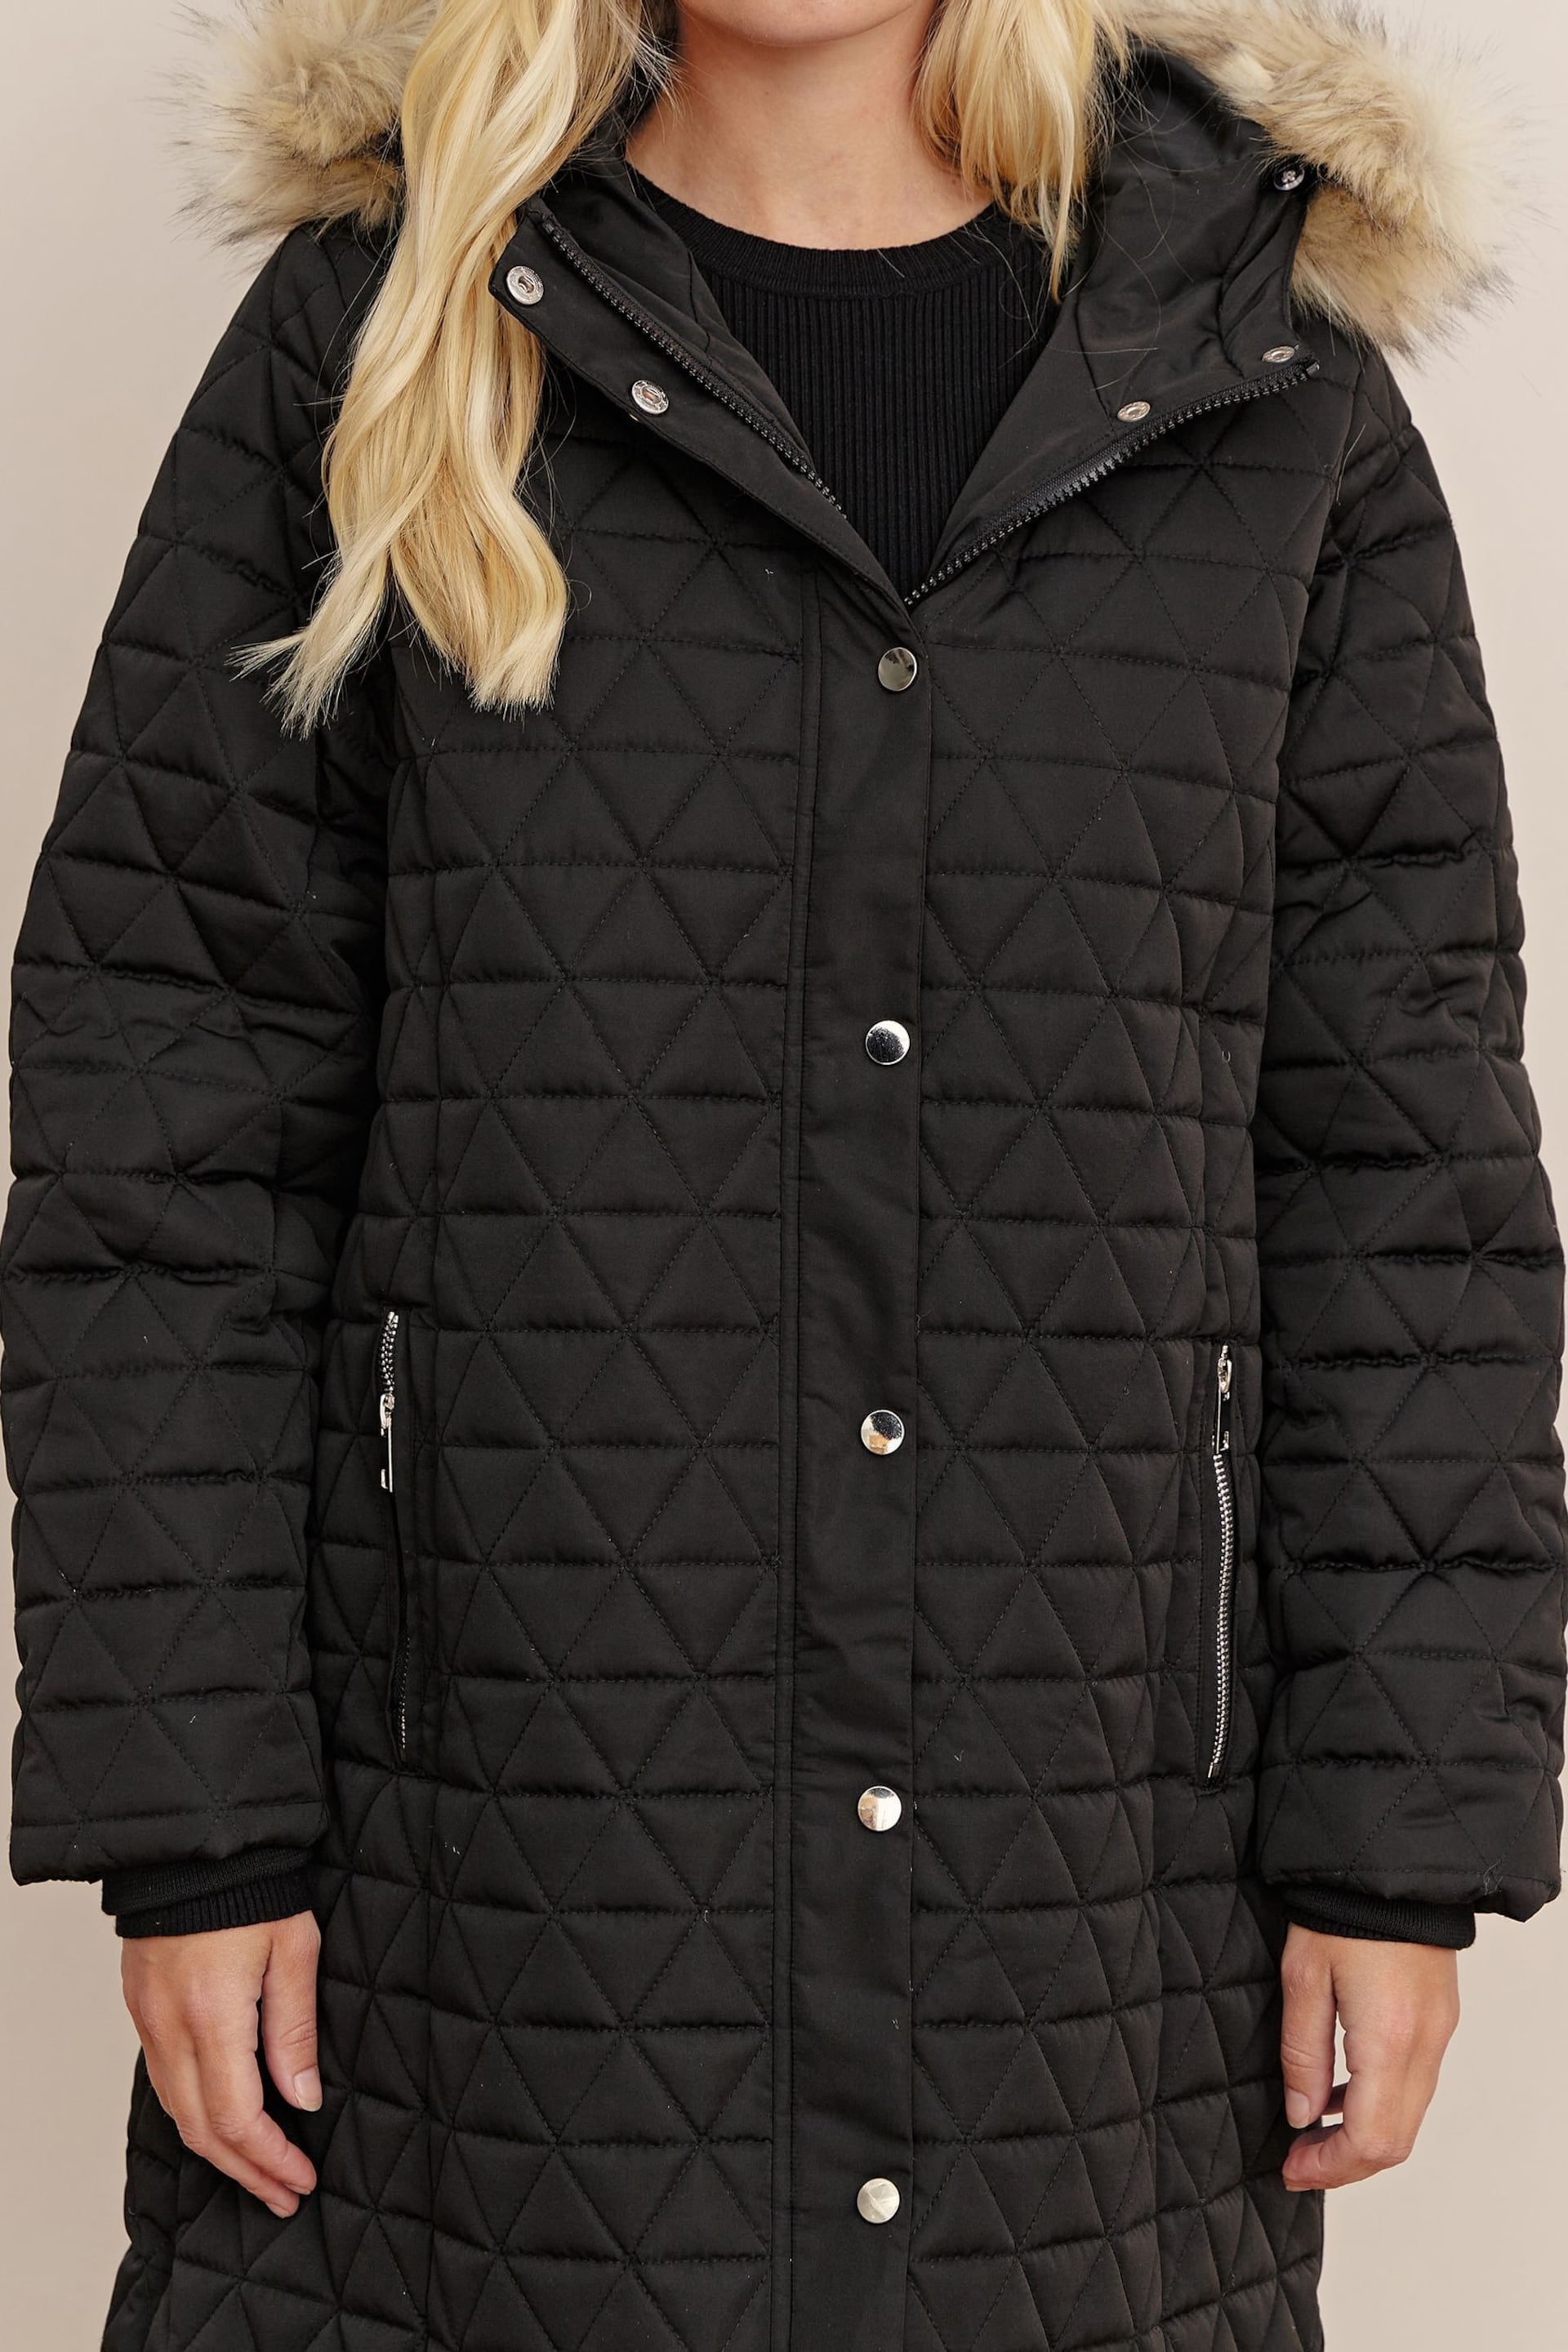 Society 8 Romy Black Quilted Faux Fur Puffer Coat - Image 6 of 6